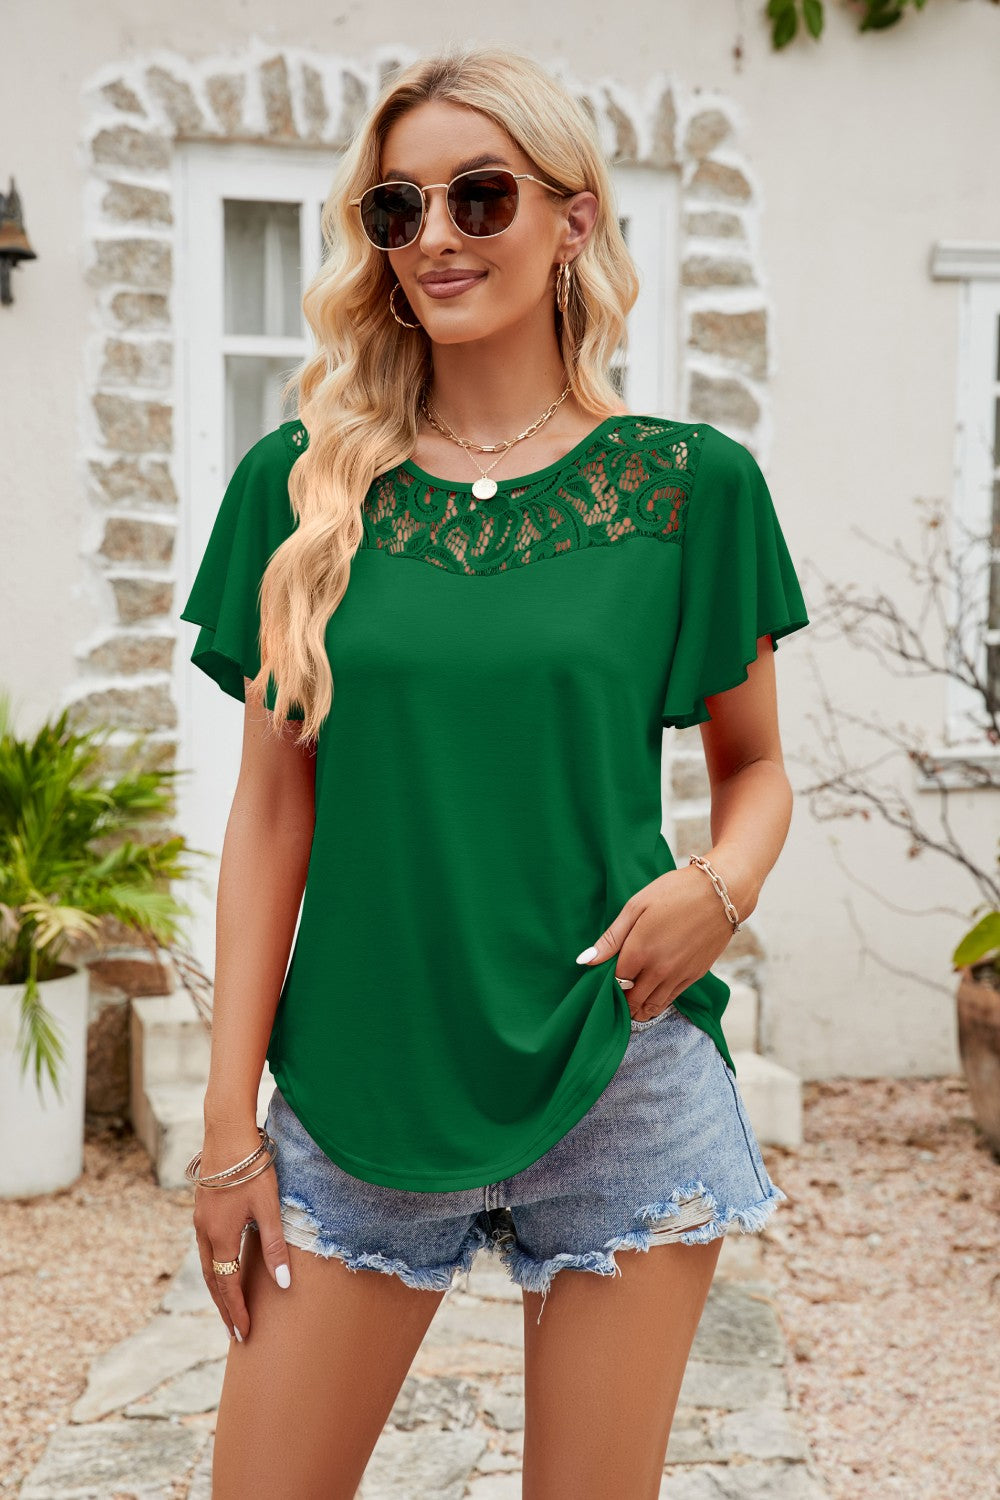 Spliced Lace Flutter Sleeve Top - Online Only